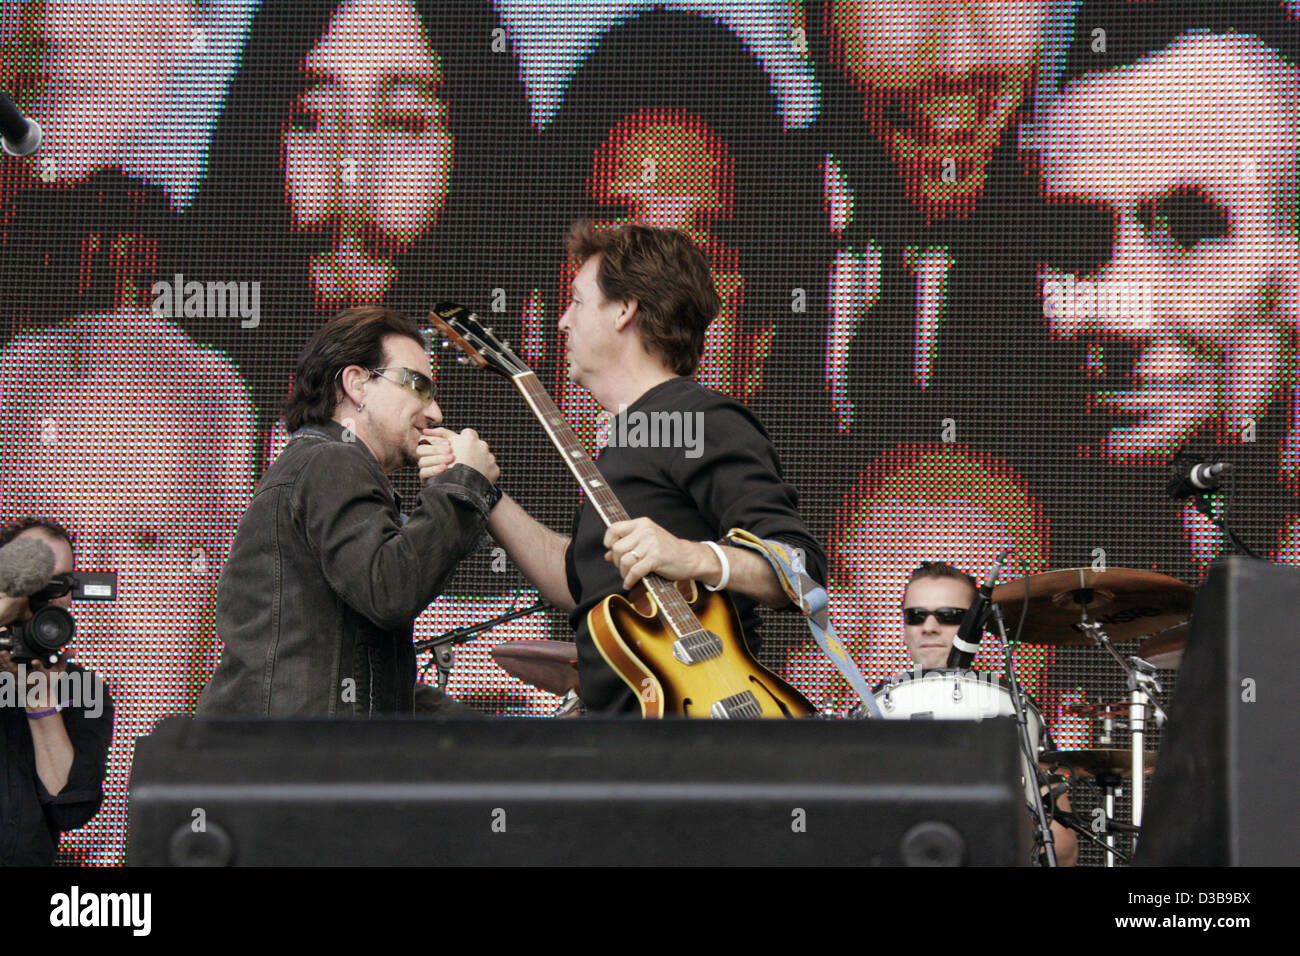 (dpa) - Bono (L) of the rock group U2 and Paul McCartney perform during the Live 8 Concert in Hyde Park in London, England 02 July 2005. The concert, held simultaneously in many cities around the world including Paris, Berlin, Philadelphia and Rome, is intended to call attention to world poverty ahe Stock Photo